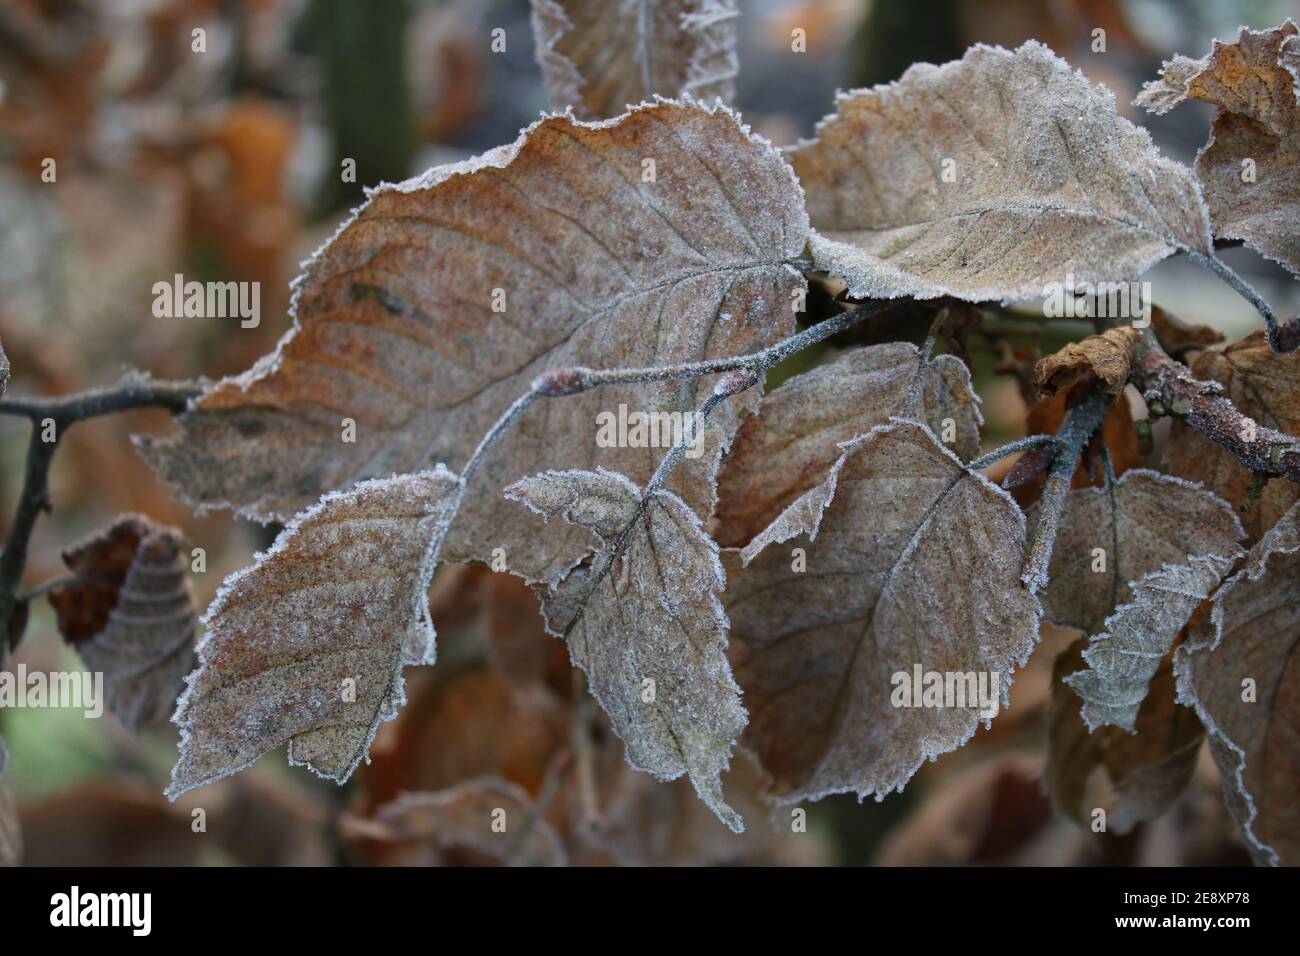 Frost outdoors close up of brown dried Autumn beech tree leaves growing on branches covered in white ice layer from frosty Winter weather garden day Stock Photo